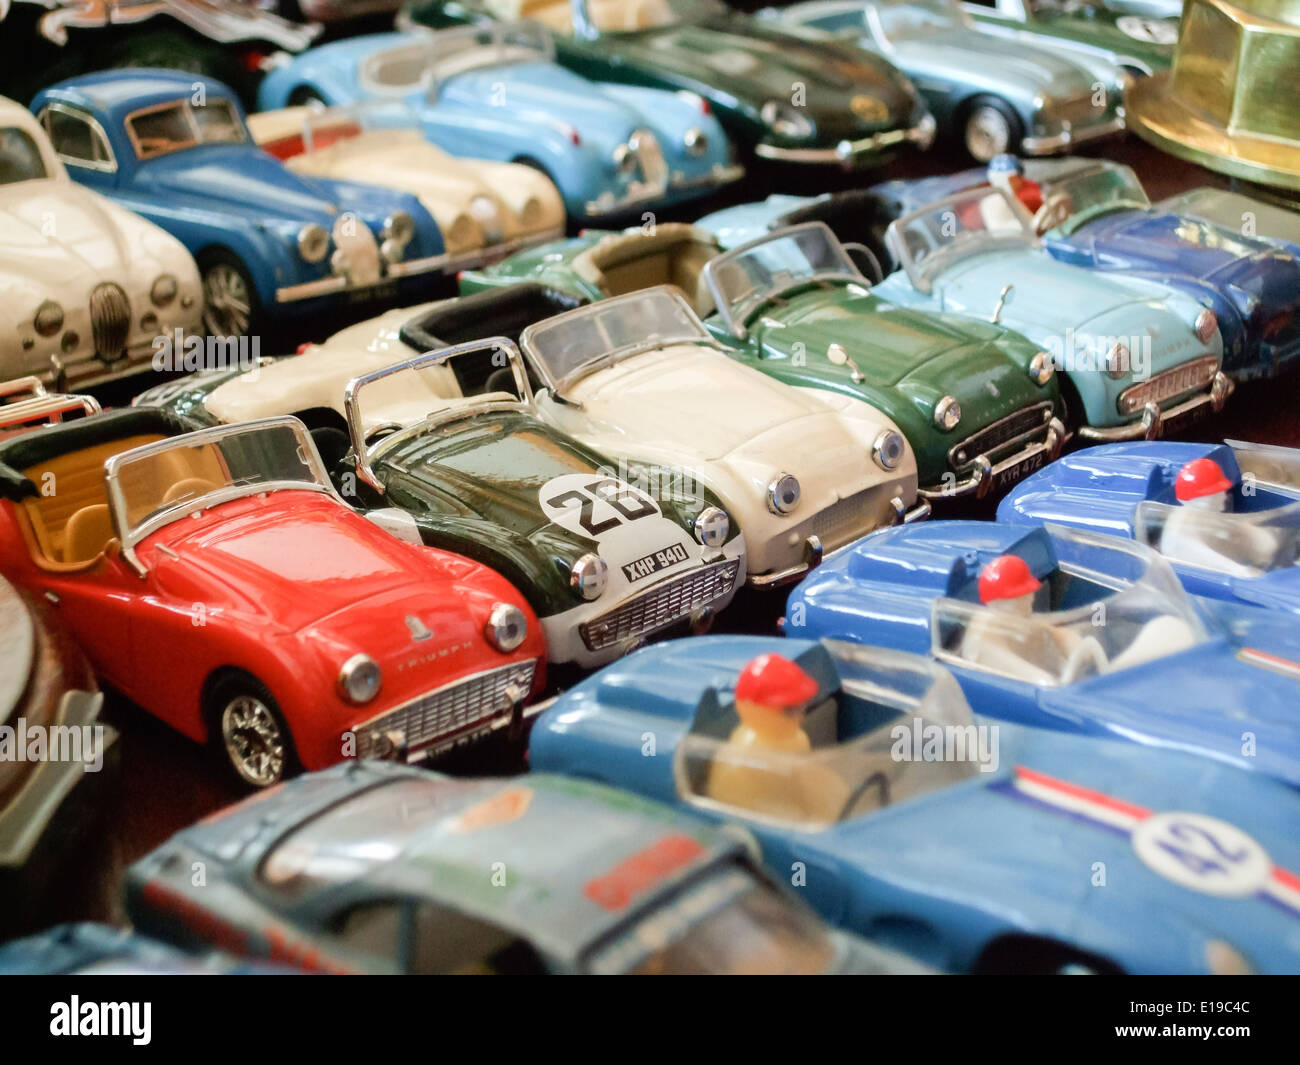 Assorted toy cars at a store Stock Photo